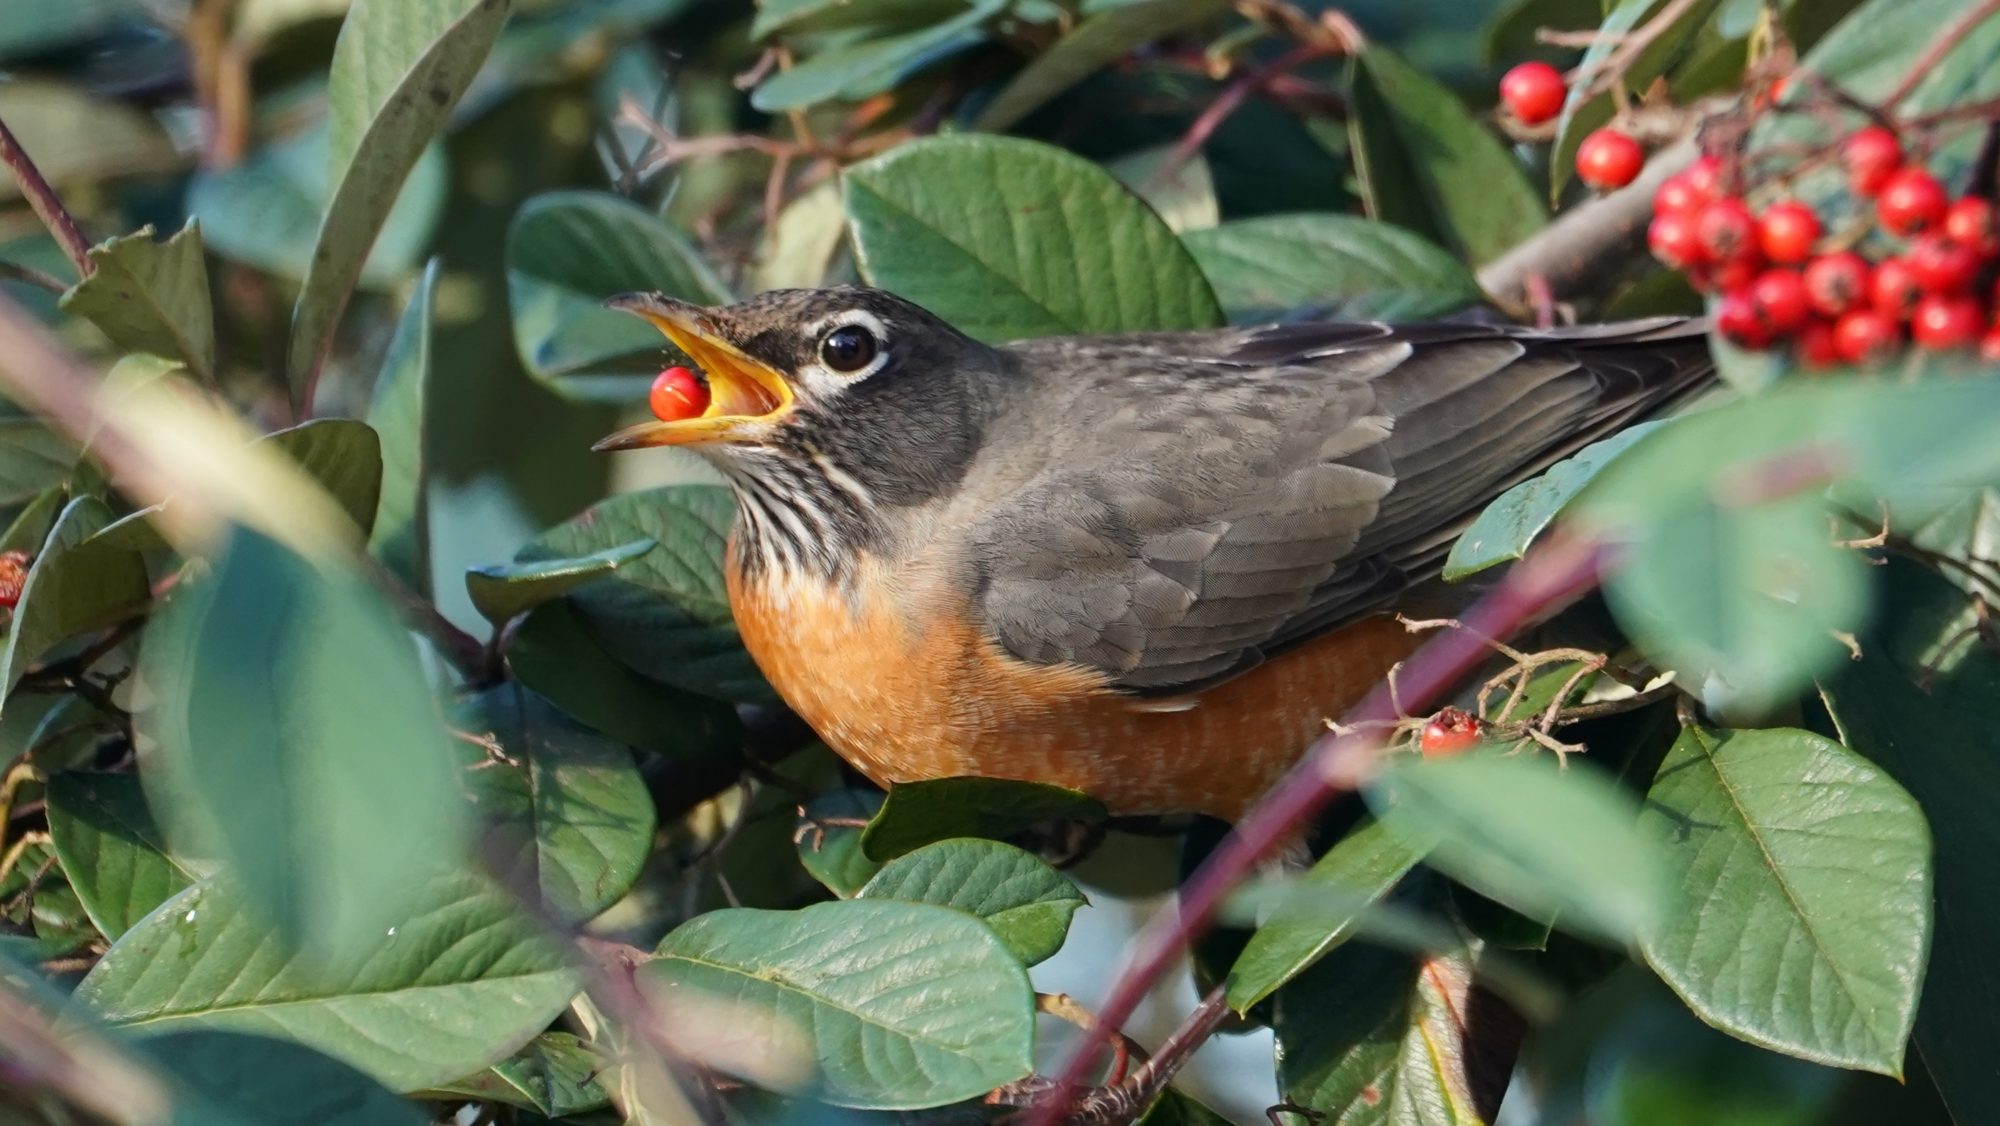 Robin eating berry